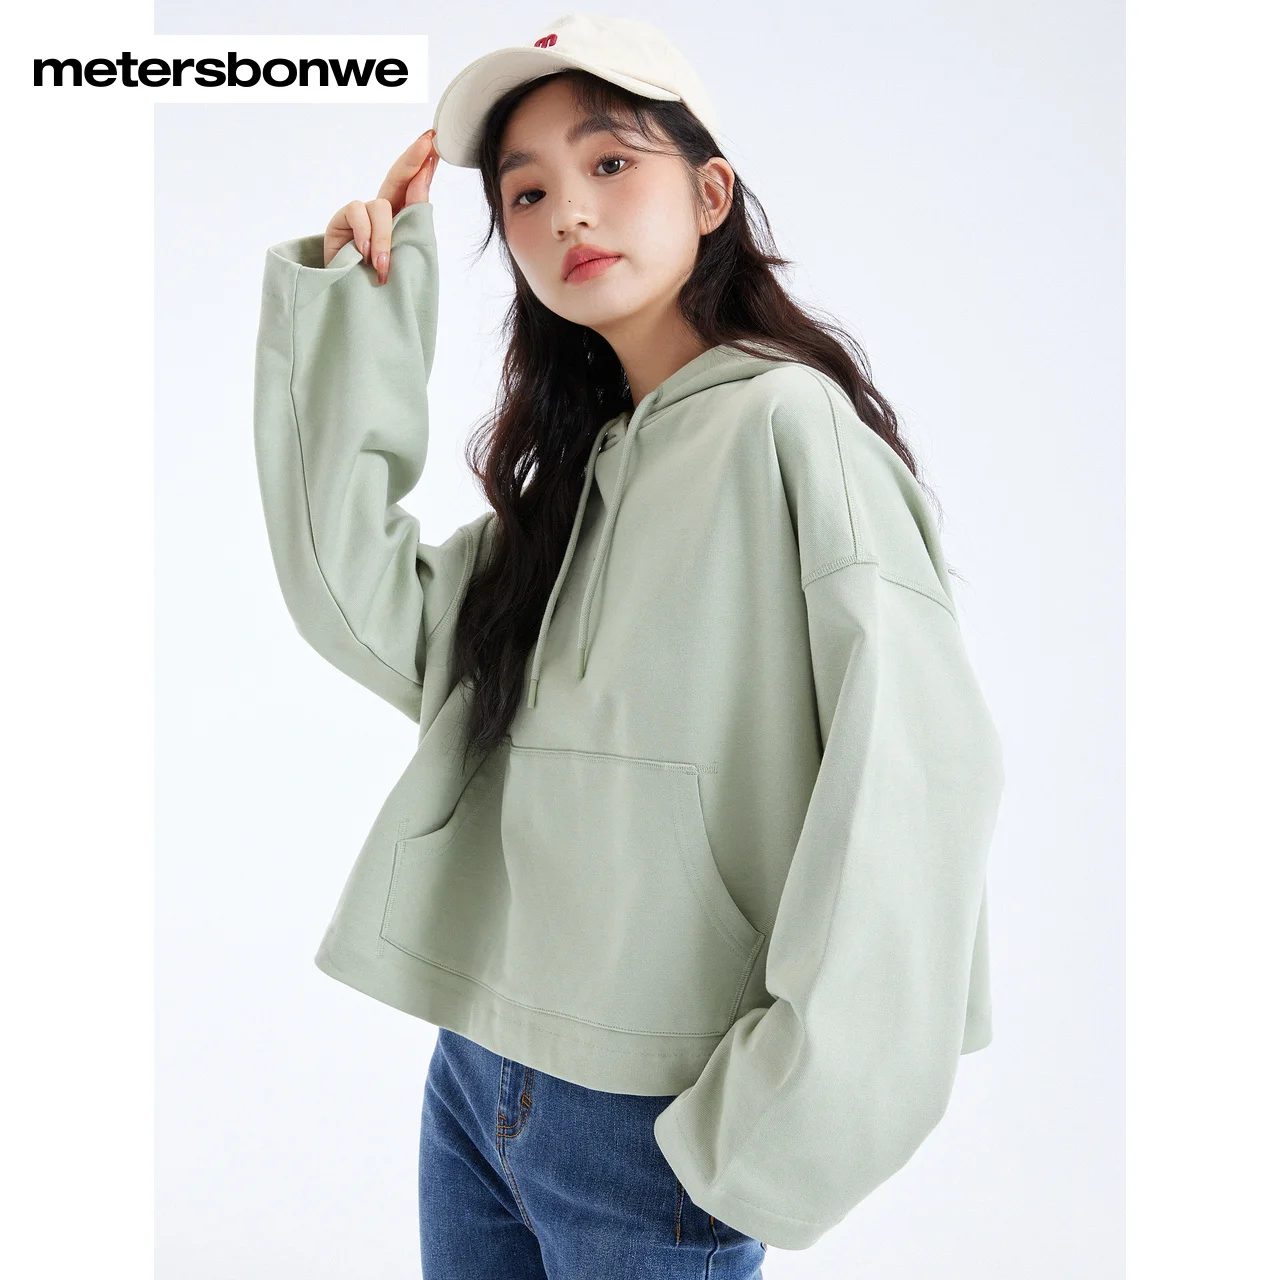 Metersbonwe Women's Basic Loose Short Solid Color Hoodies 100%Cotton Hooded Pullover Loose Spring Autumn Casual Youth Warm Tops